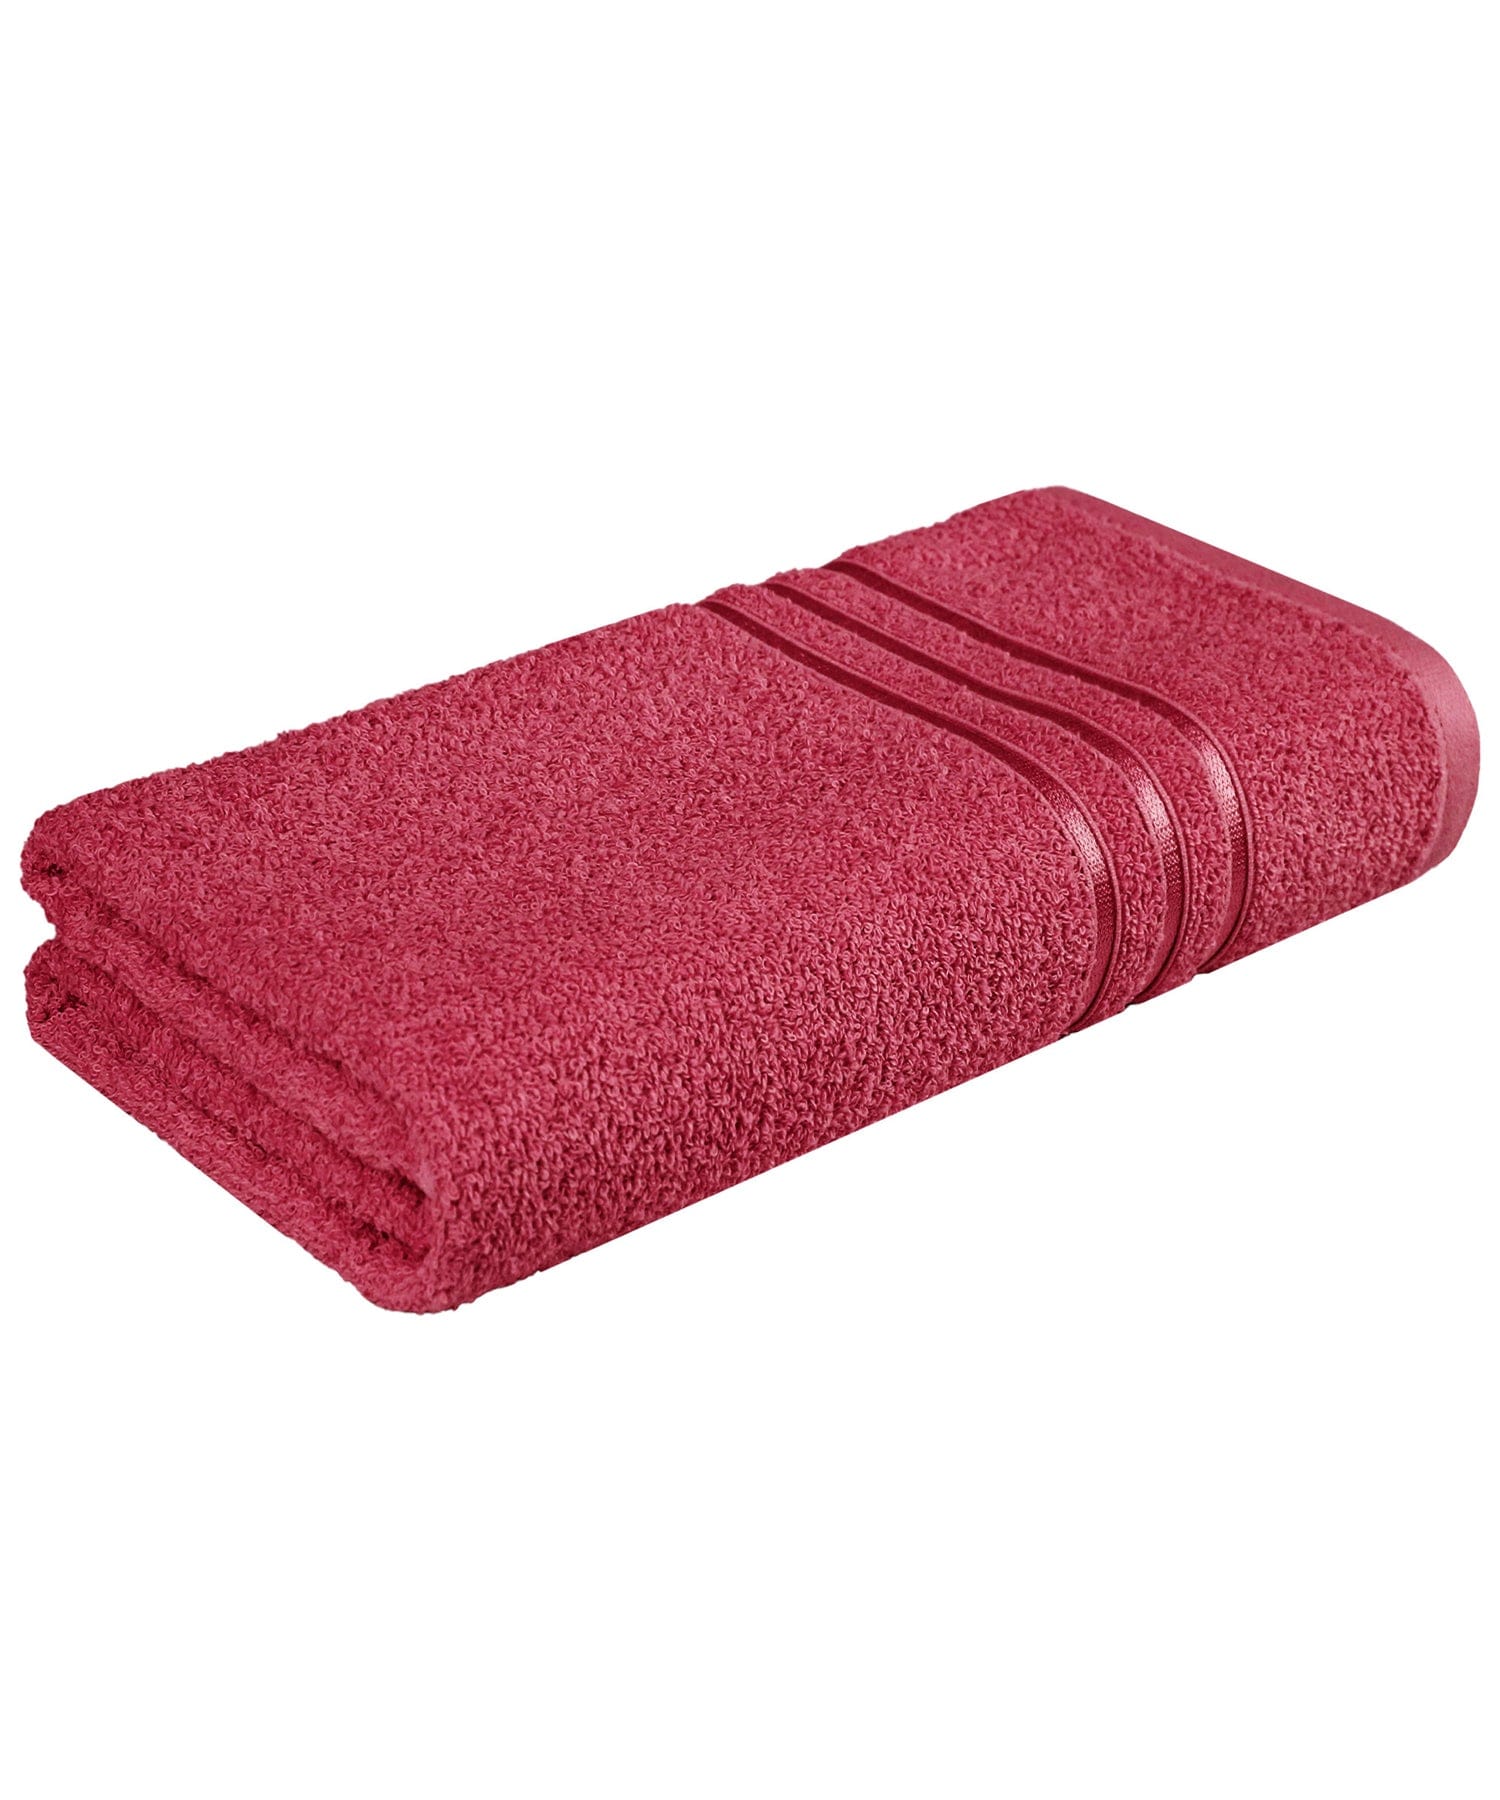 COMFORT LIVING TOWELS,100% Cotton,Quicky Dry,Light Weight, TANGO TOMATO